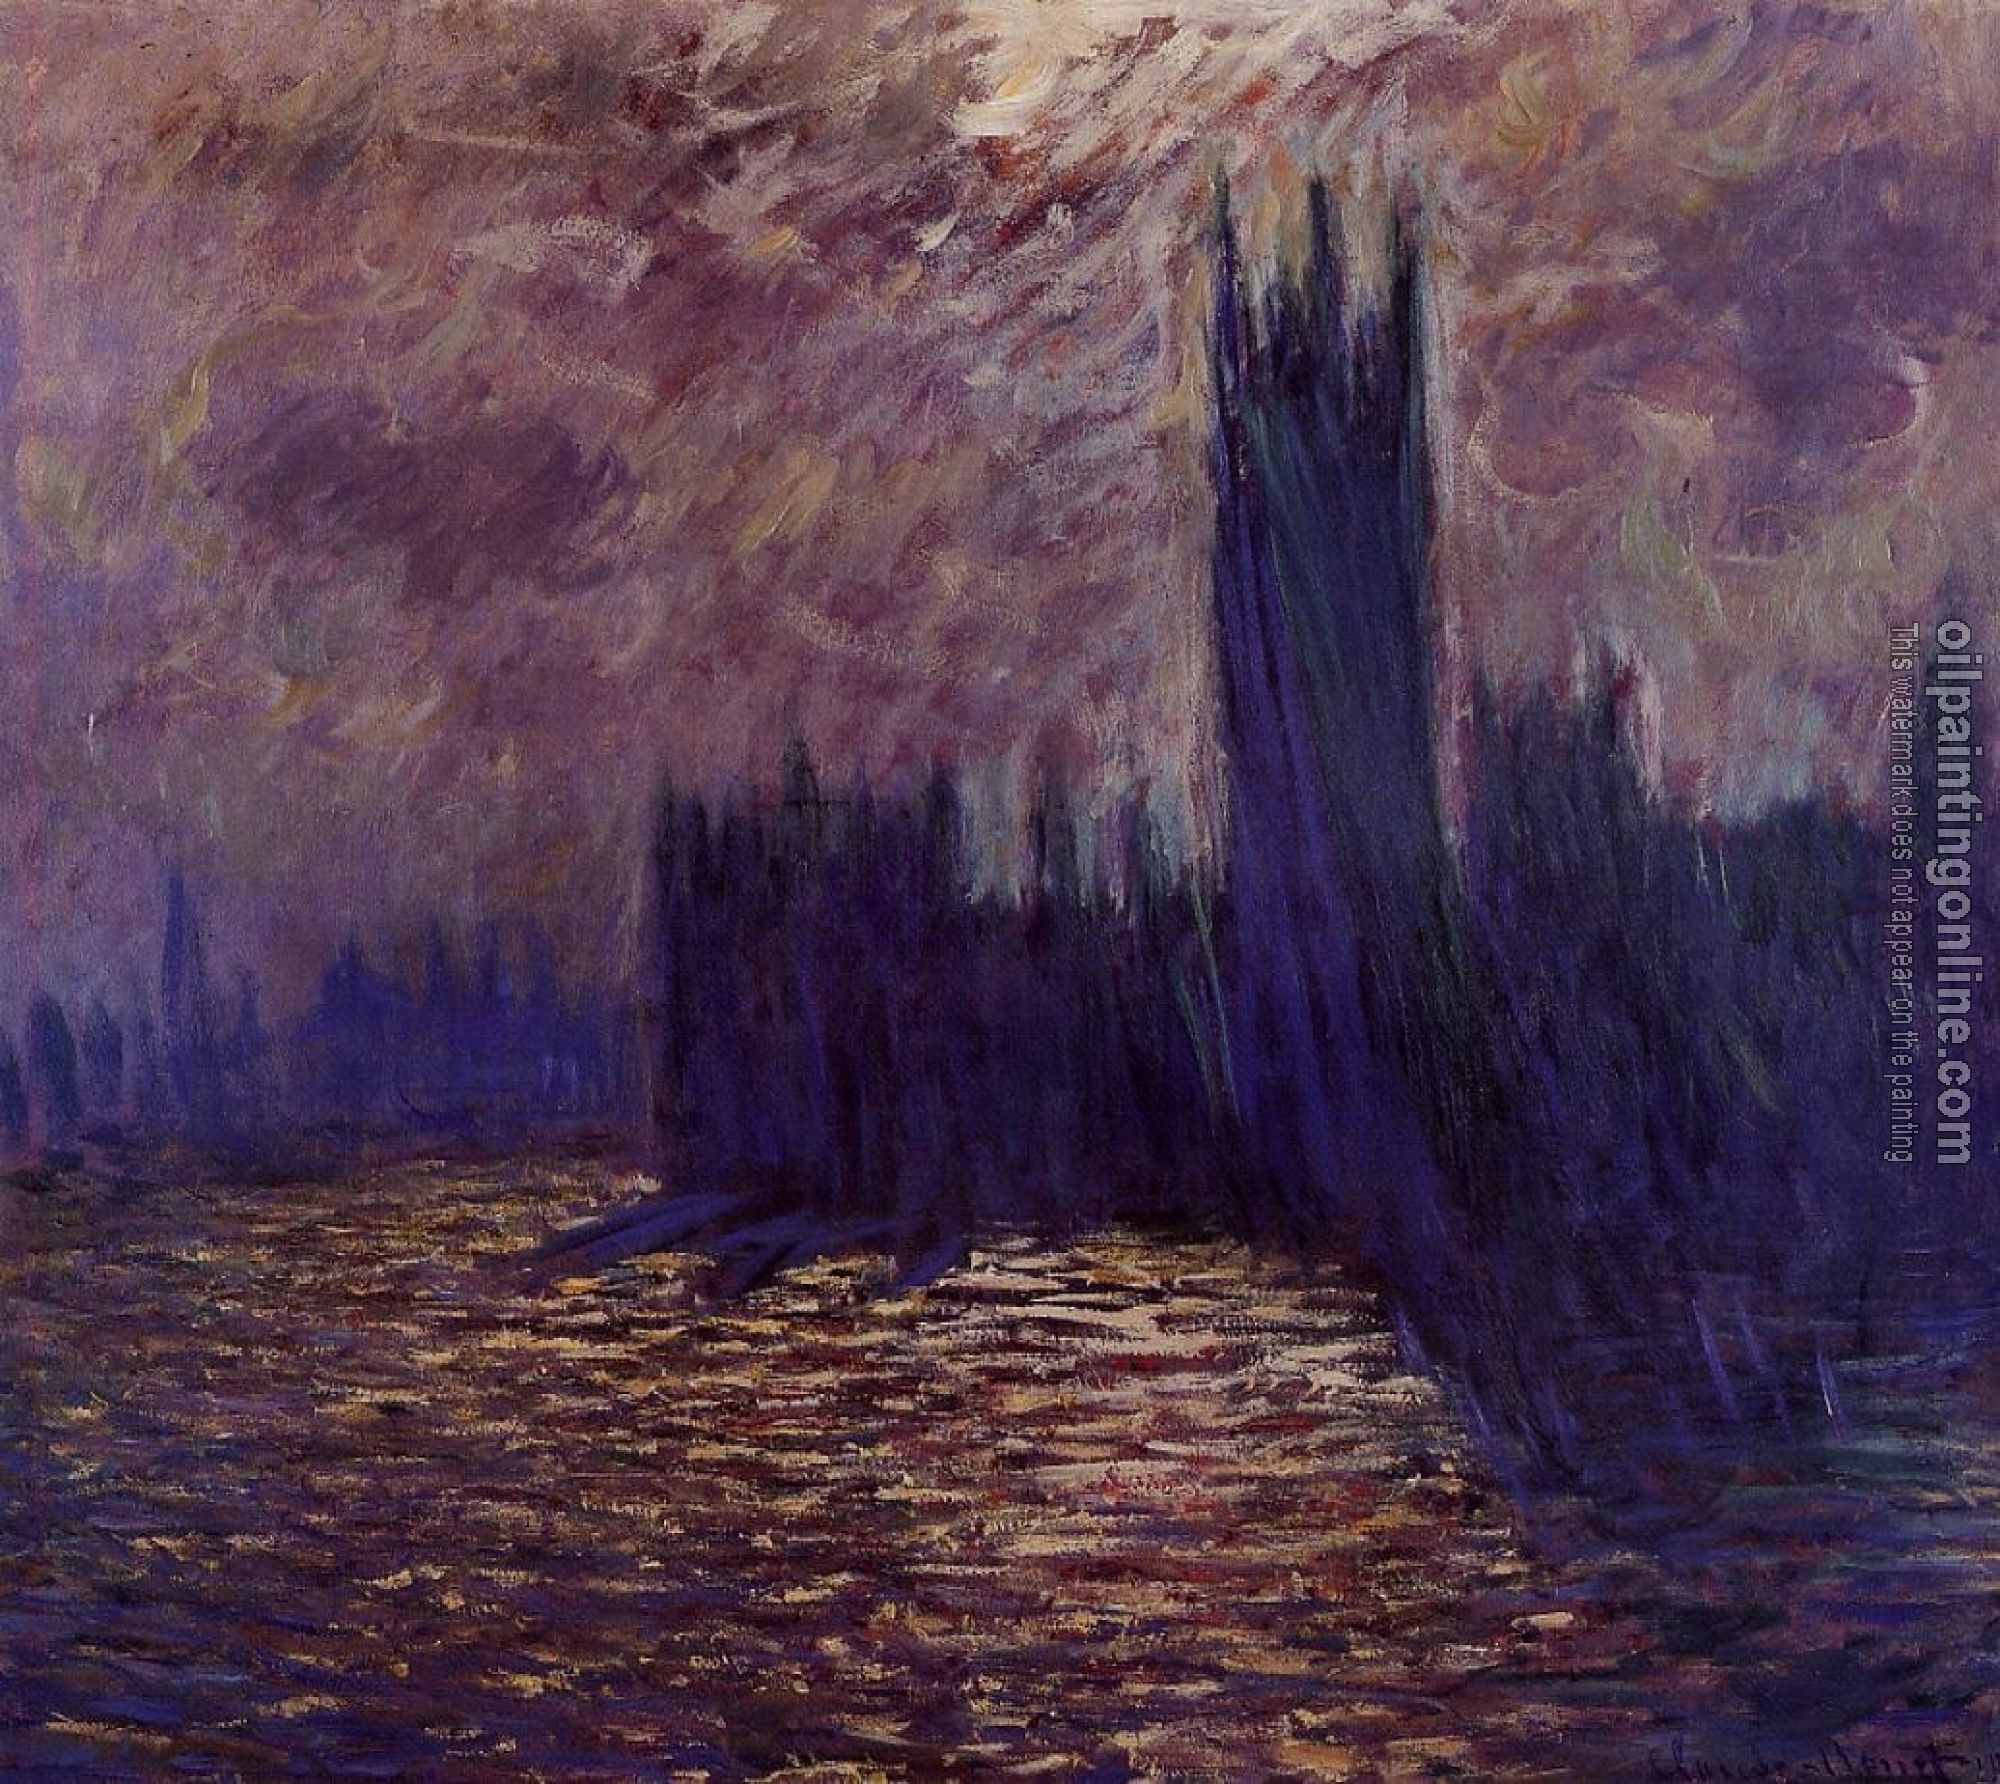 Monet, Claude Oscar - Houses of Parliament, Reflection of the Thames